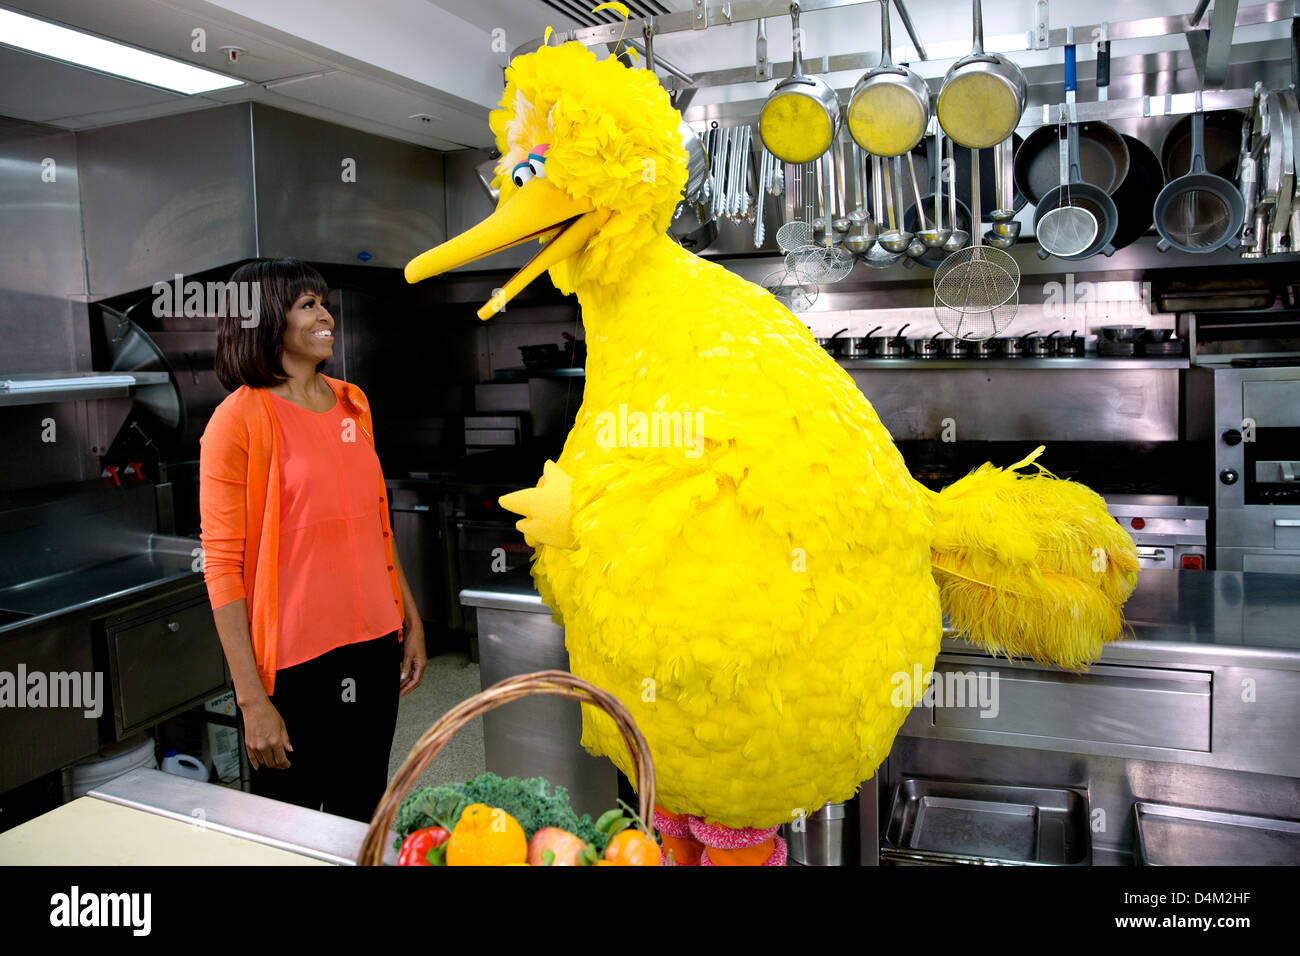 US First Lady Michelle Obama participates in a Let’s Move! and Sesame Street public service announcement taping with Big Bird in the White House Kitchen February 13, 2013 in Washington, DC. Stock Photo